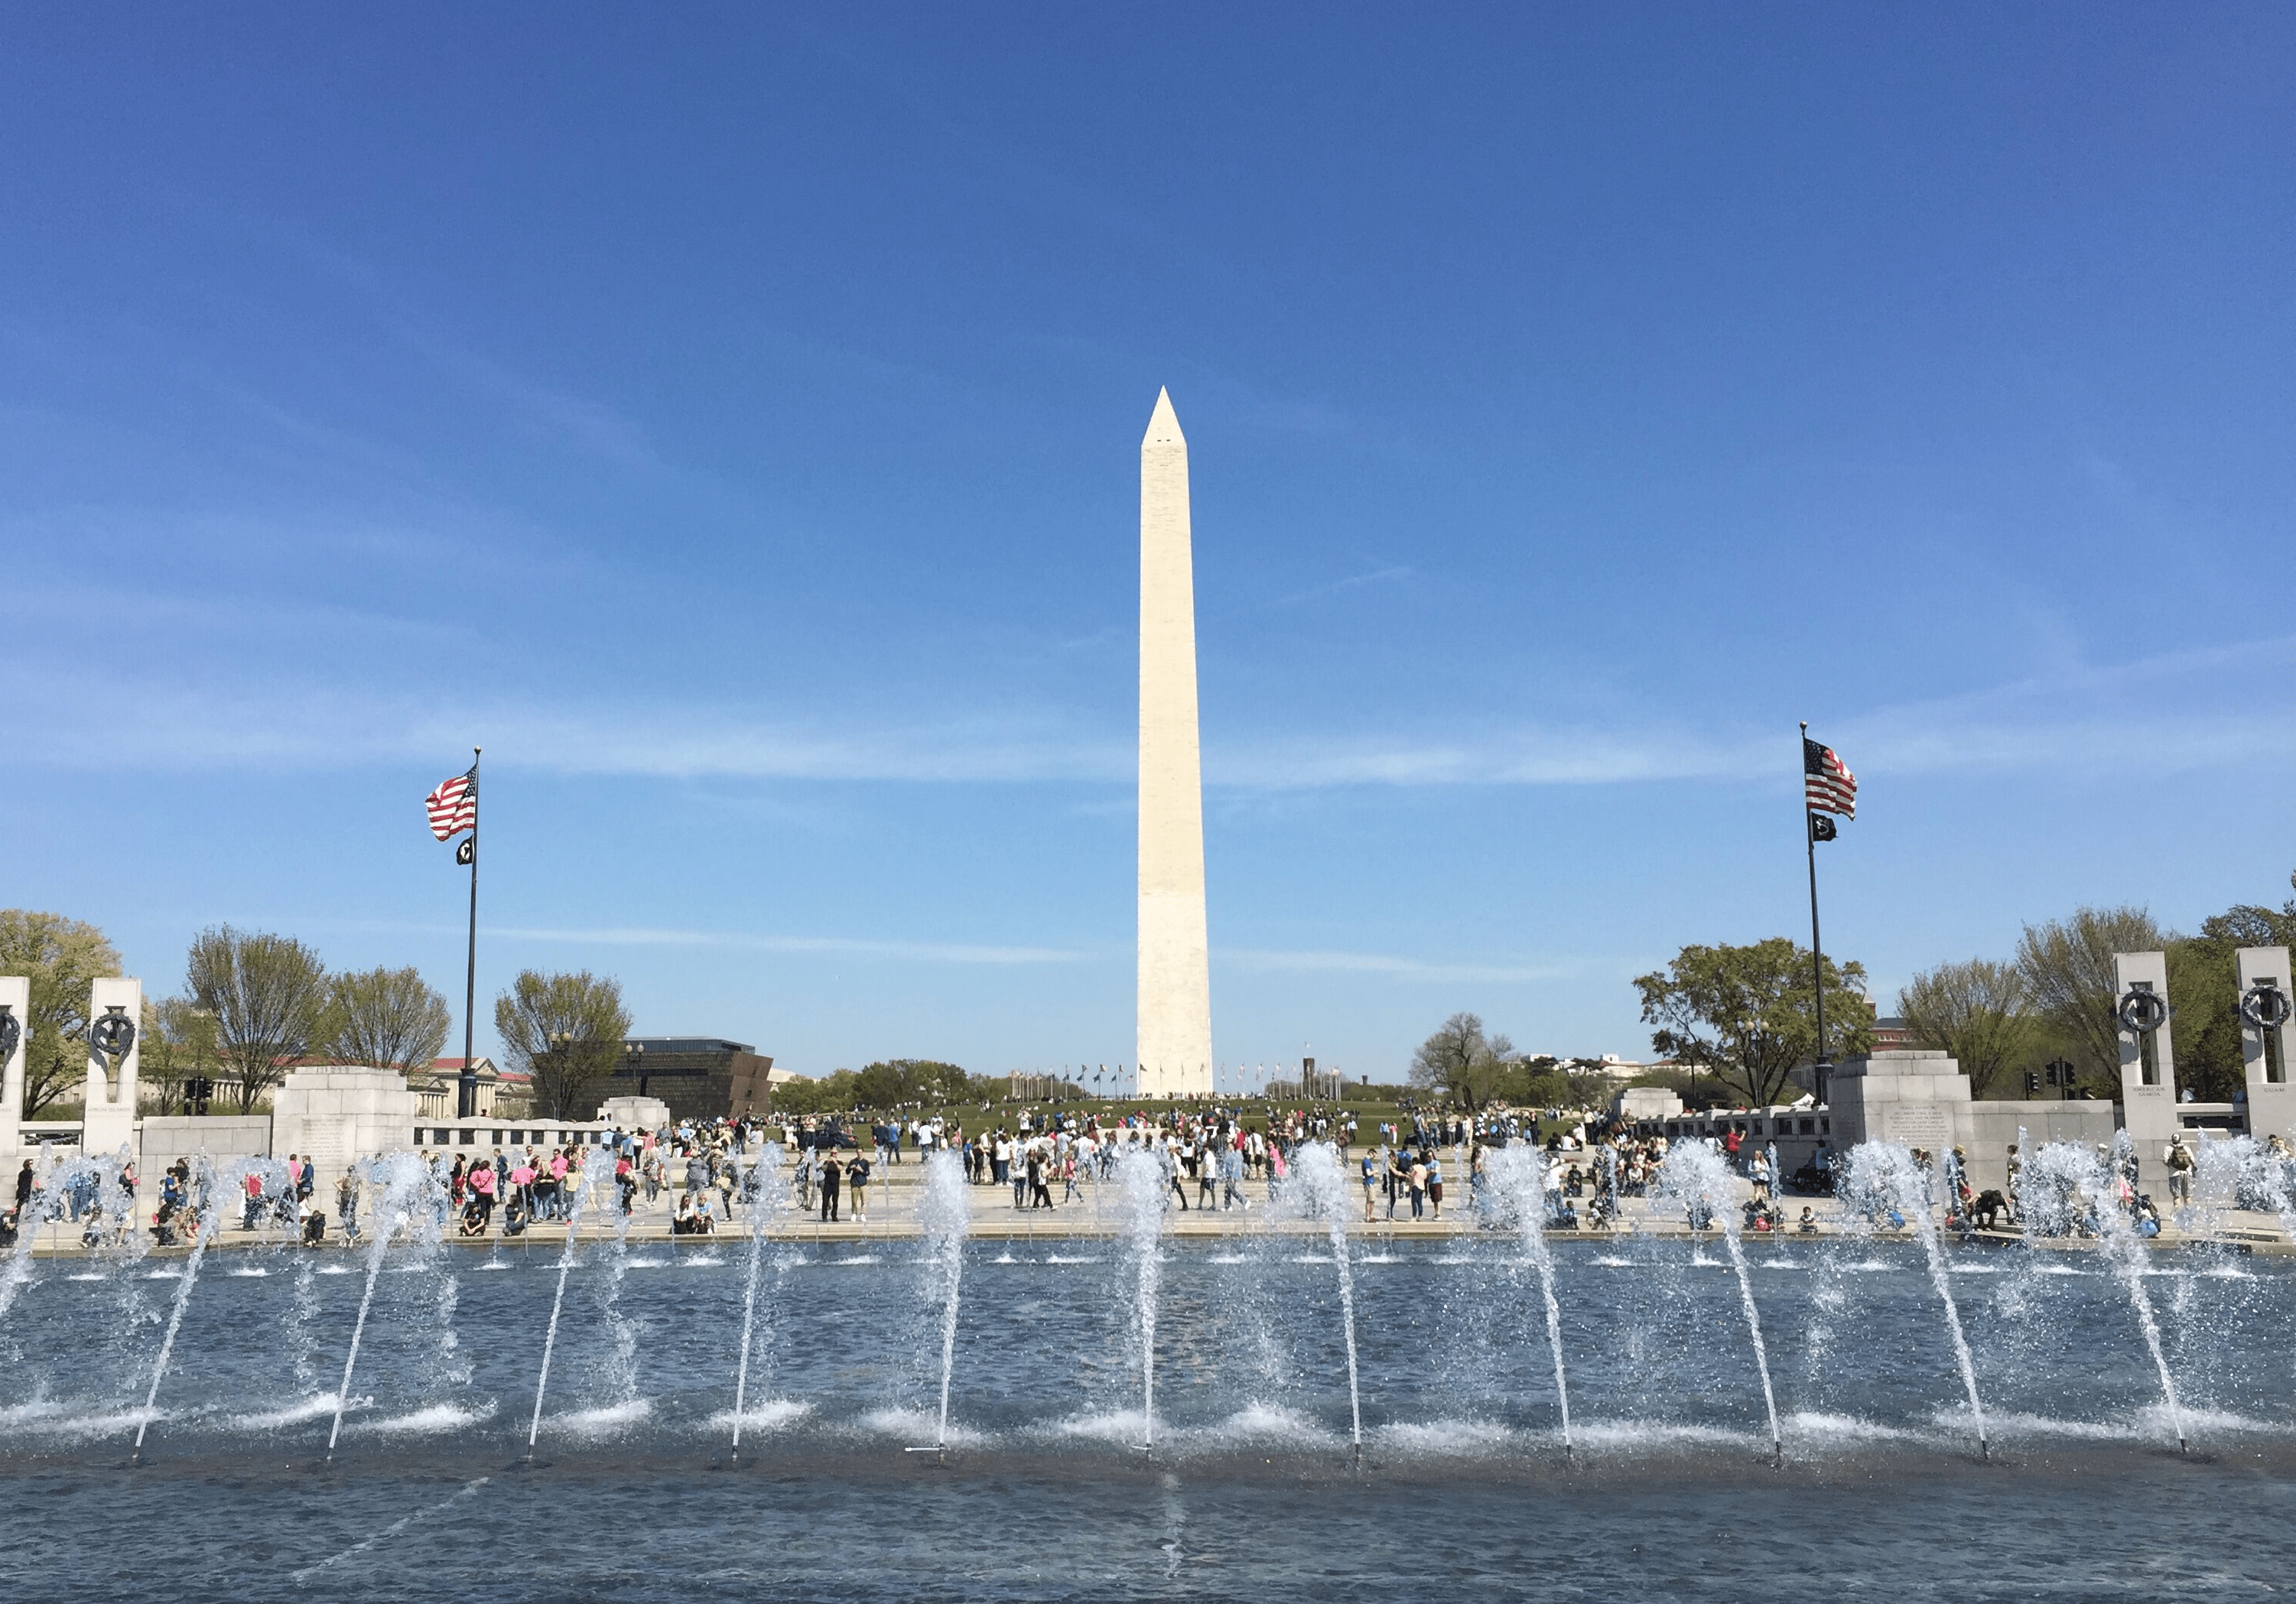 Photo of Washington Monument in Washington, D.C. Fountain in foreground.